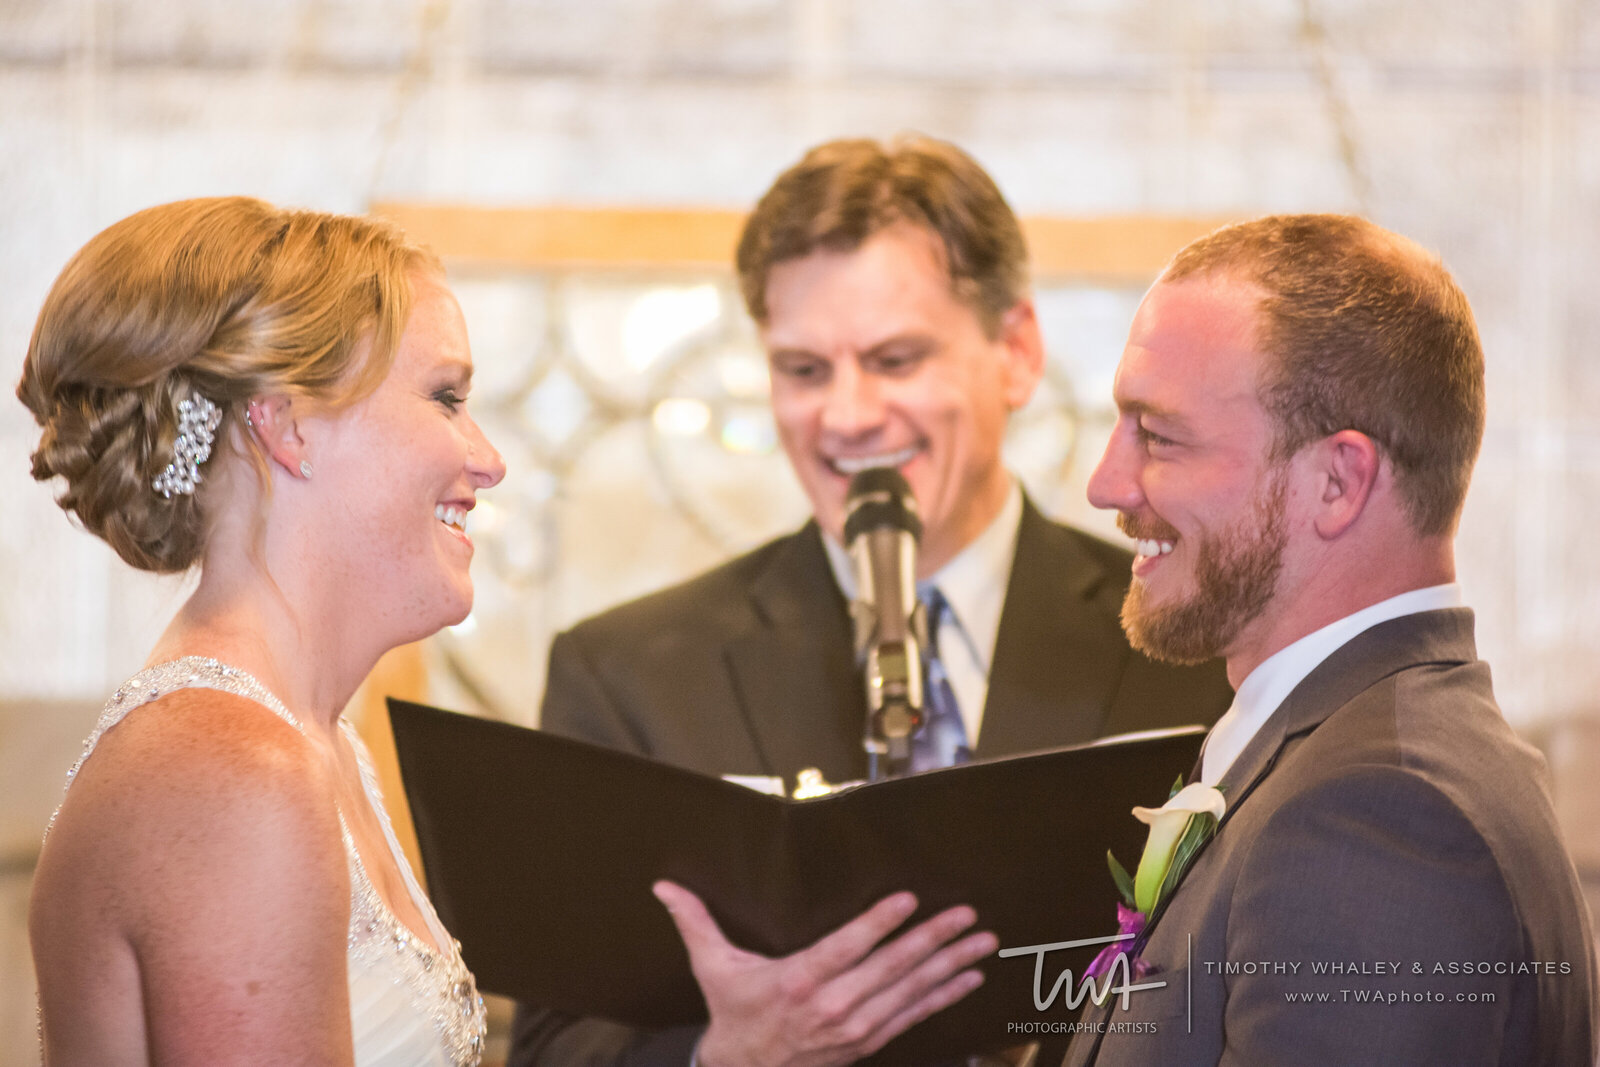 Bride, groom, and officiant smile during wedding ceremony